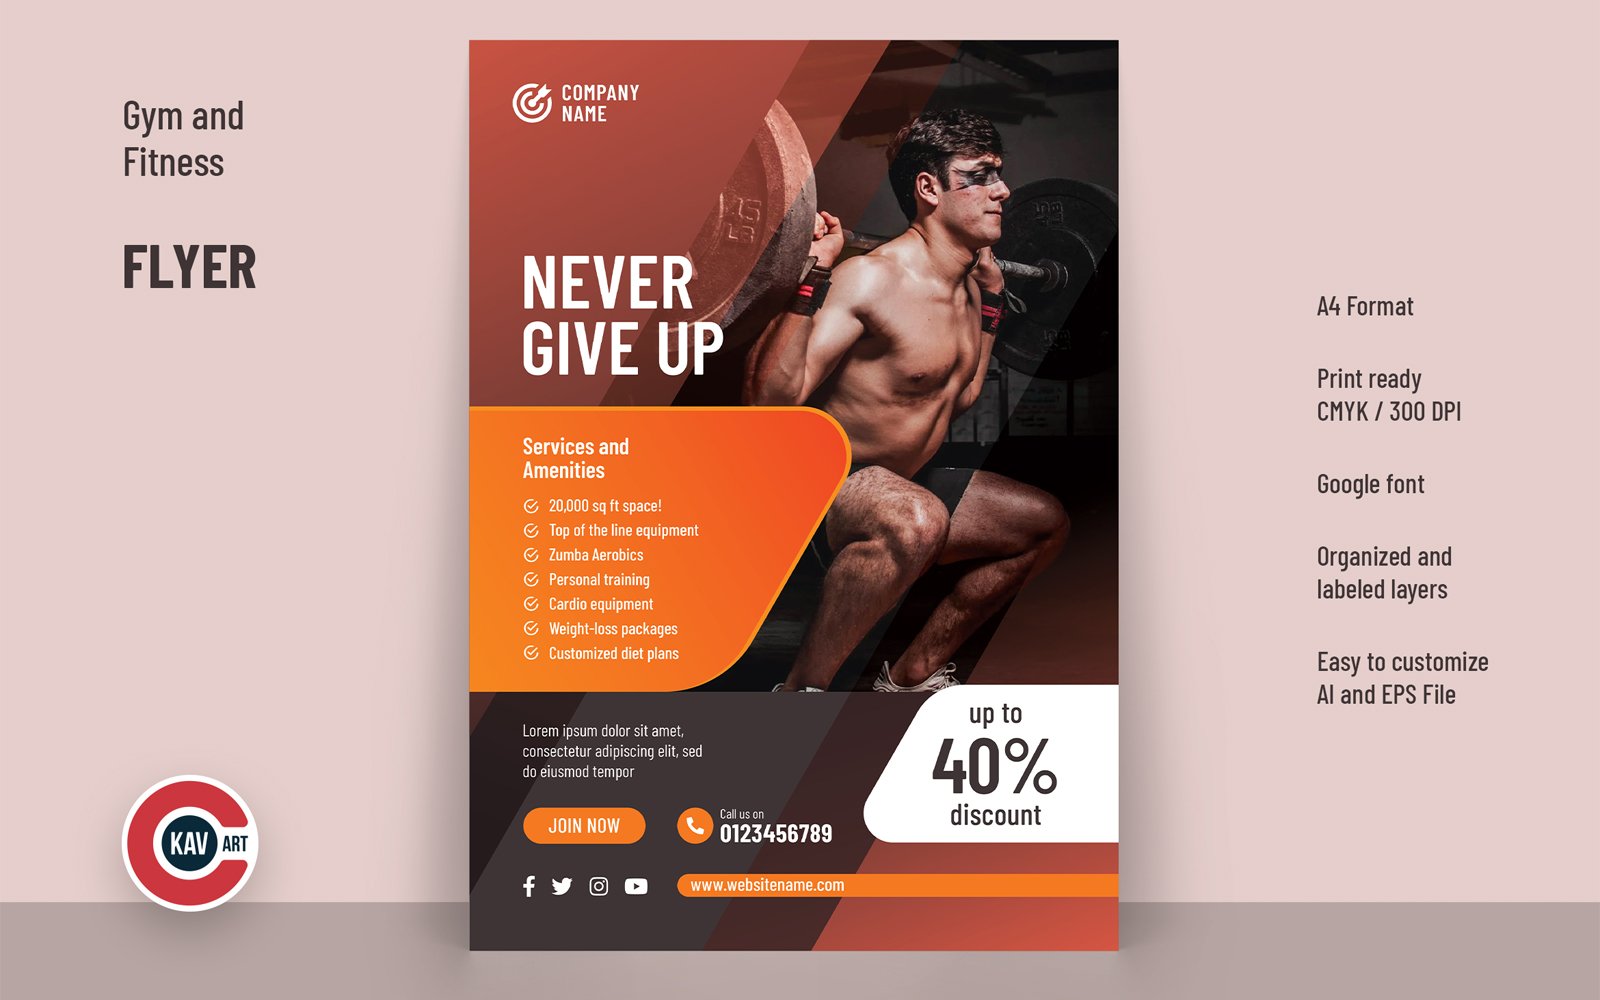 Flyer or Poster Template for Gym and Fitness - 00208